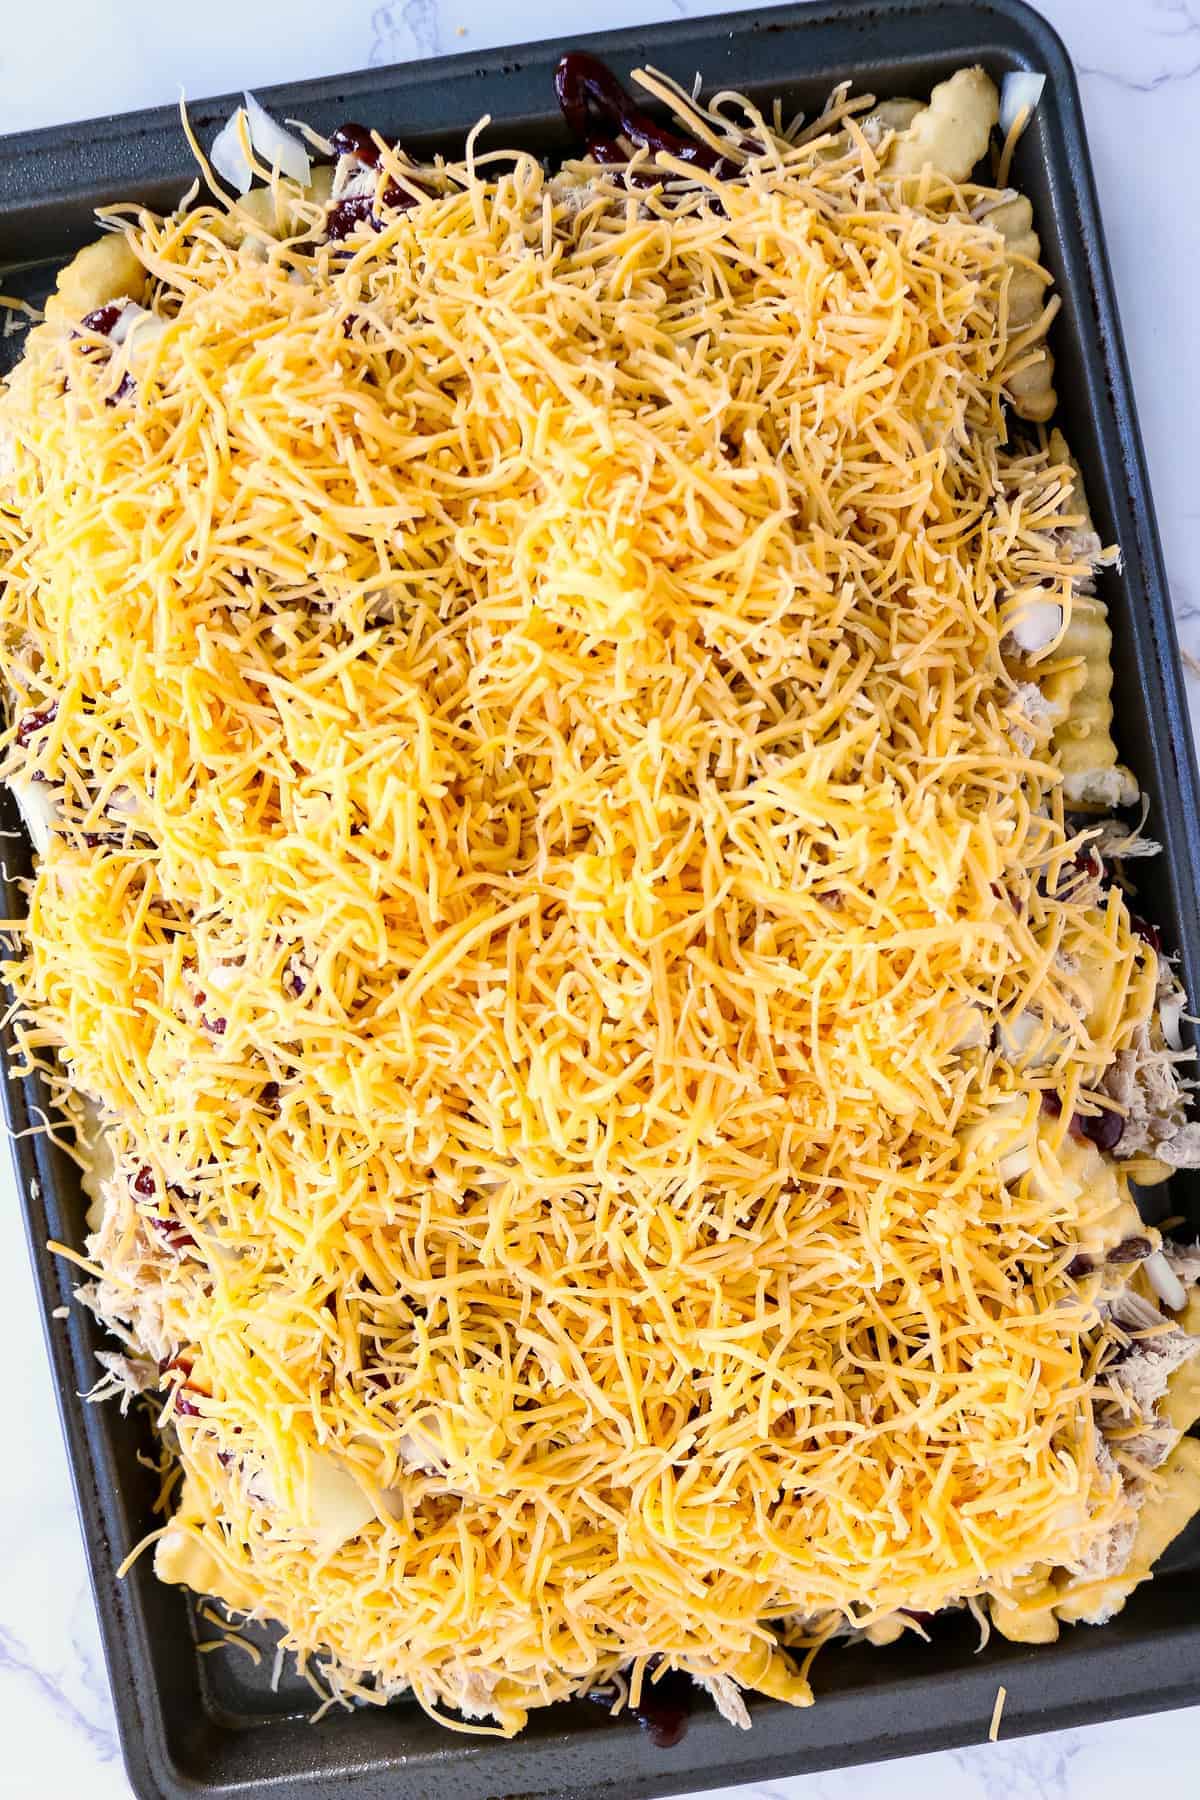 Sheet pan with frozen french fries, pulled pork, BBQ sauce, cheese and onions on it